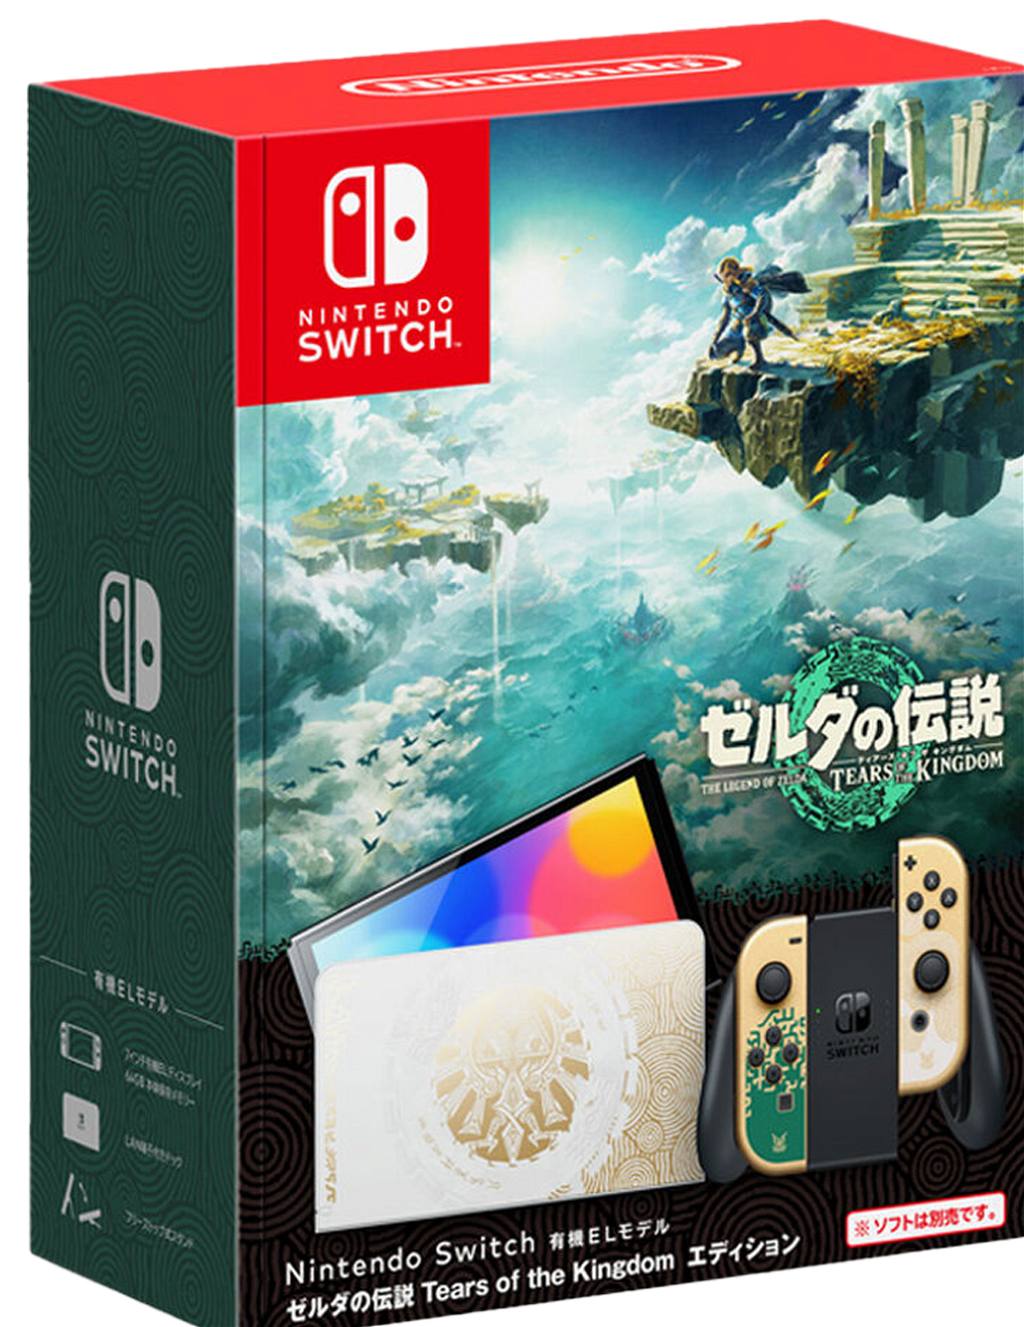 Nintendo Switch Model [The Legend of Zelda: of the Kingdom Edition] (Limited